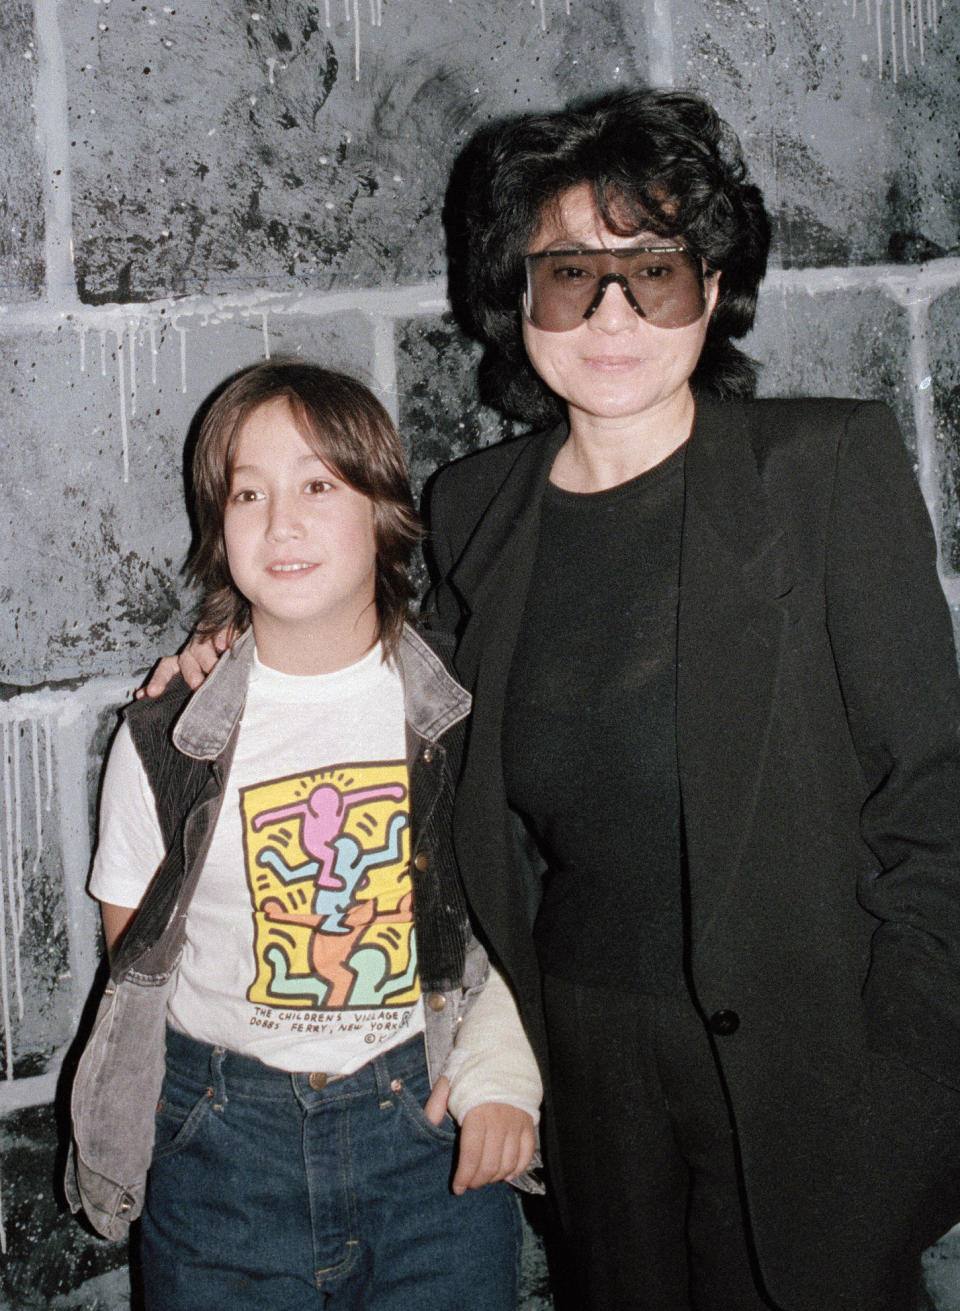 FILE - Sean Lennon, left, appears with his mother Yoko Ono in New York on Oct. 7, 1985. An album, "Gimme Some Truth" by John Lennon, will be released Friday, on what would have been his 80th birthday. (AP Photo/David Bookstaver, File)